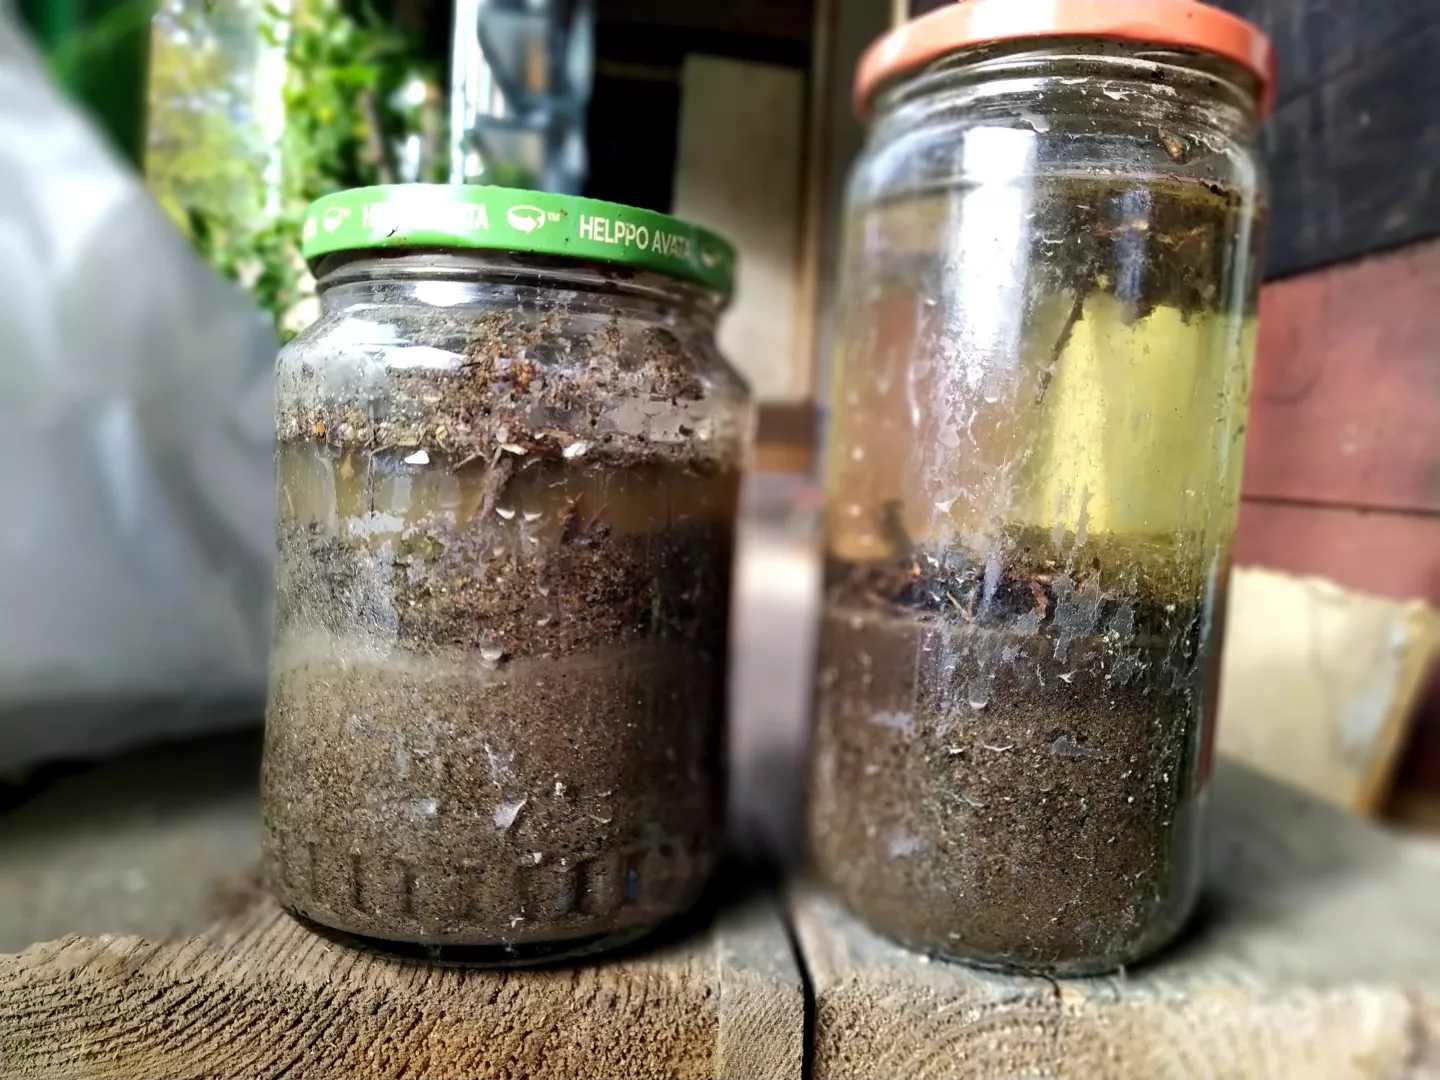 soil analysis - Left = after, Right = before – adding organic material